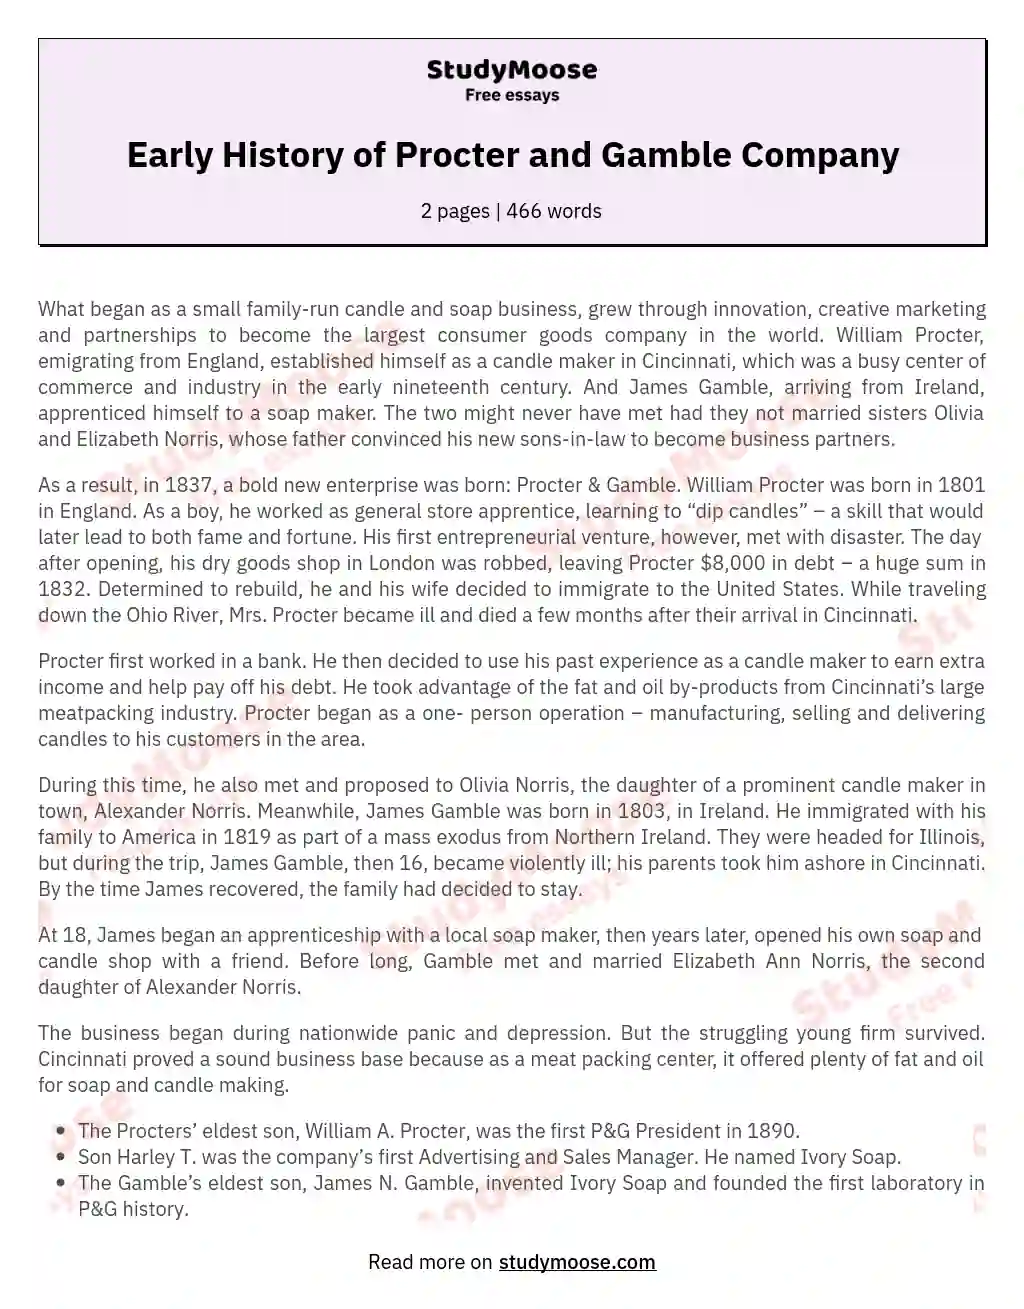 Early History of Procter and Gamble Company essay